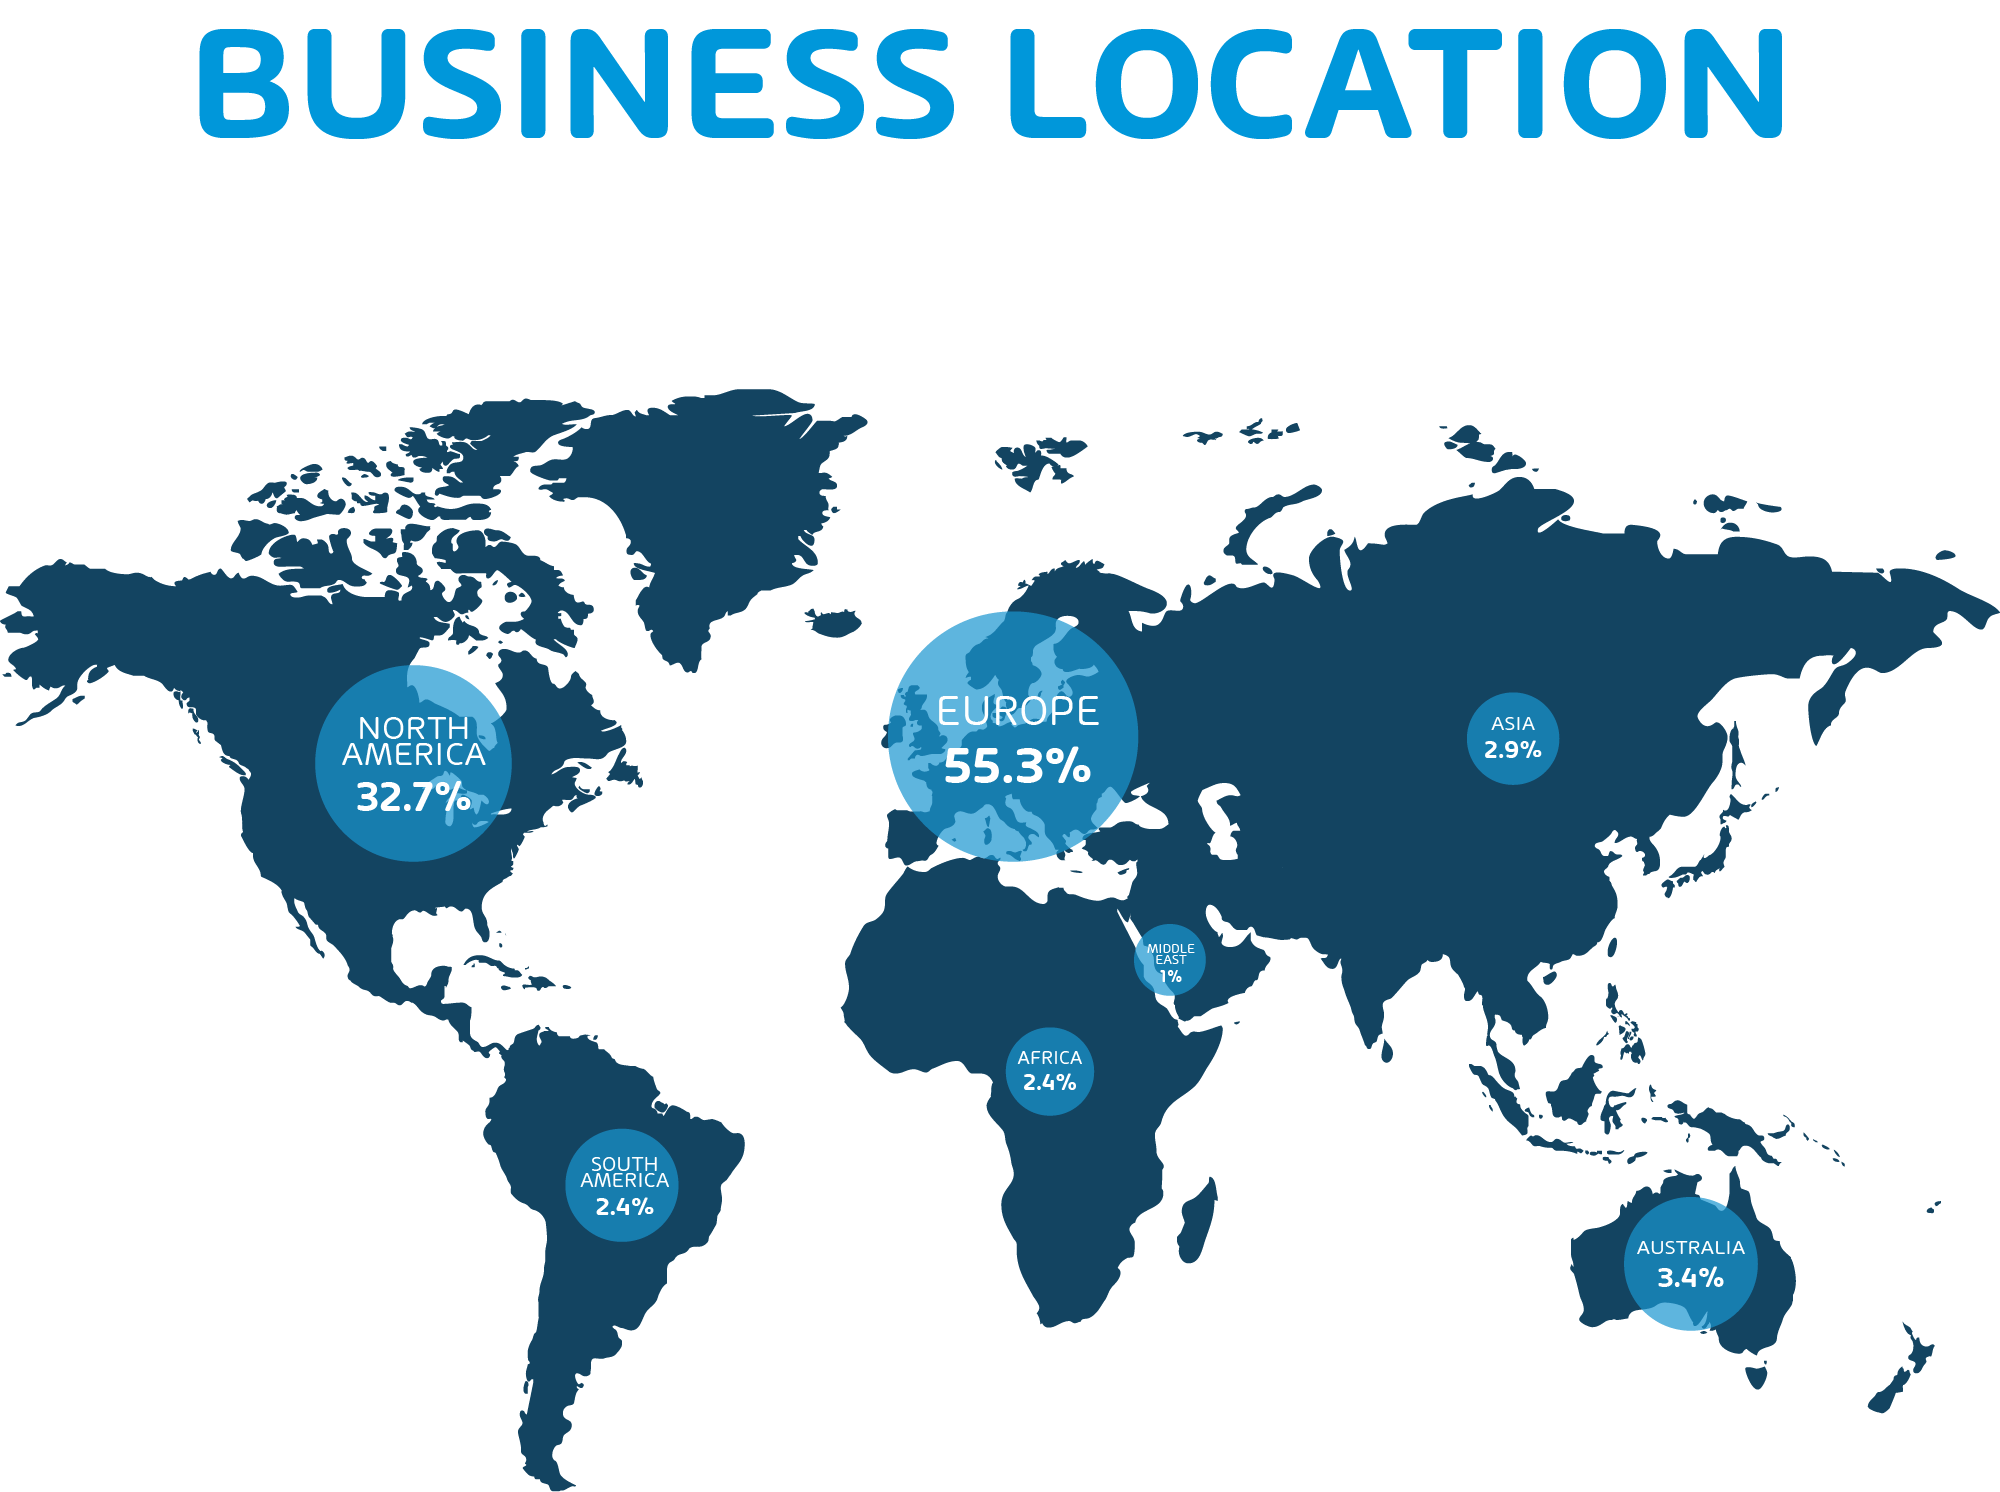 Location of Respondents Business by Continent